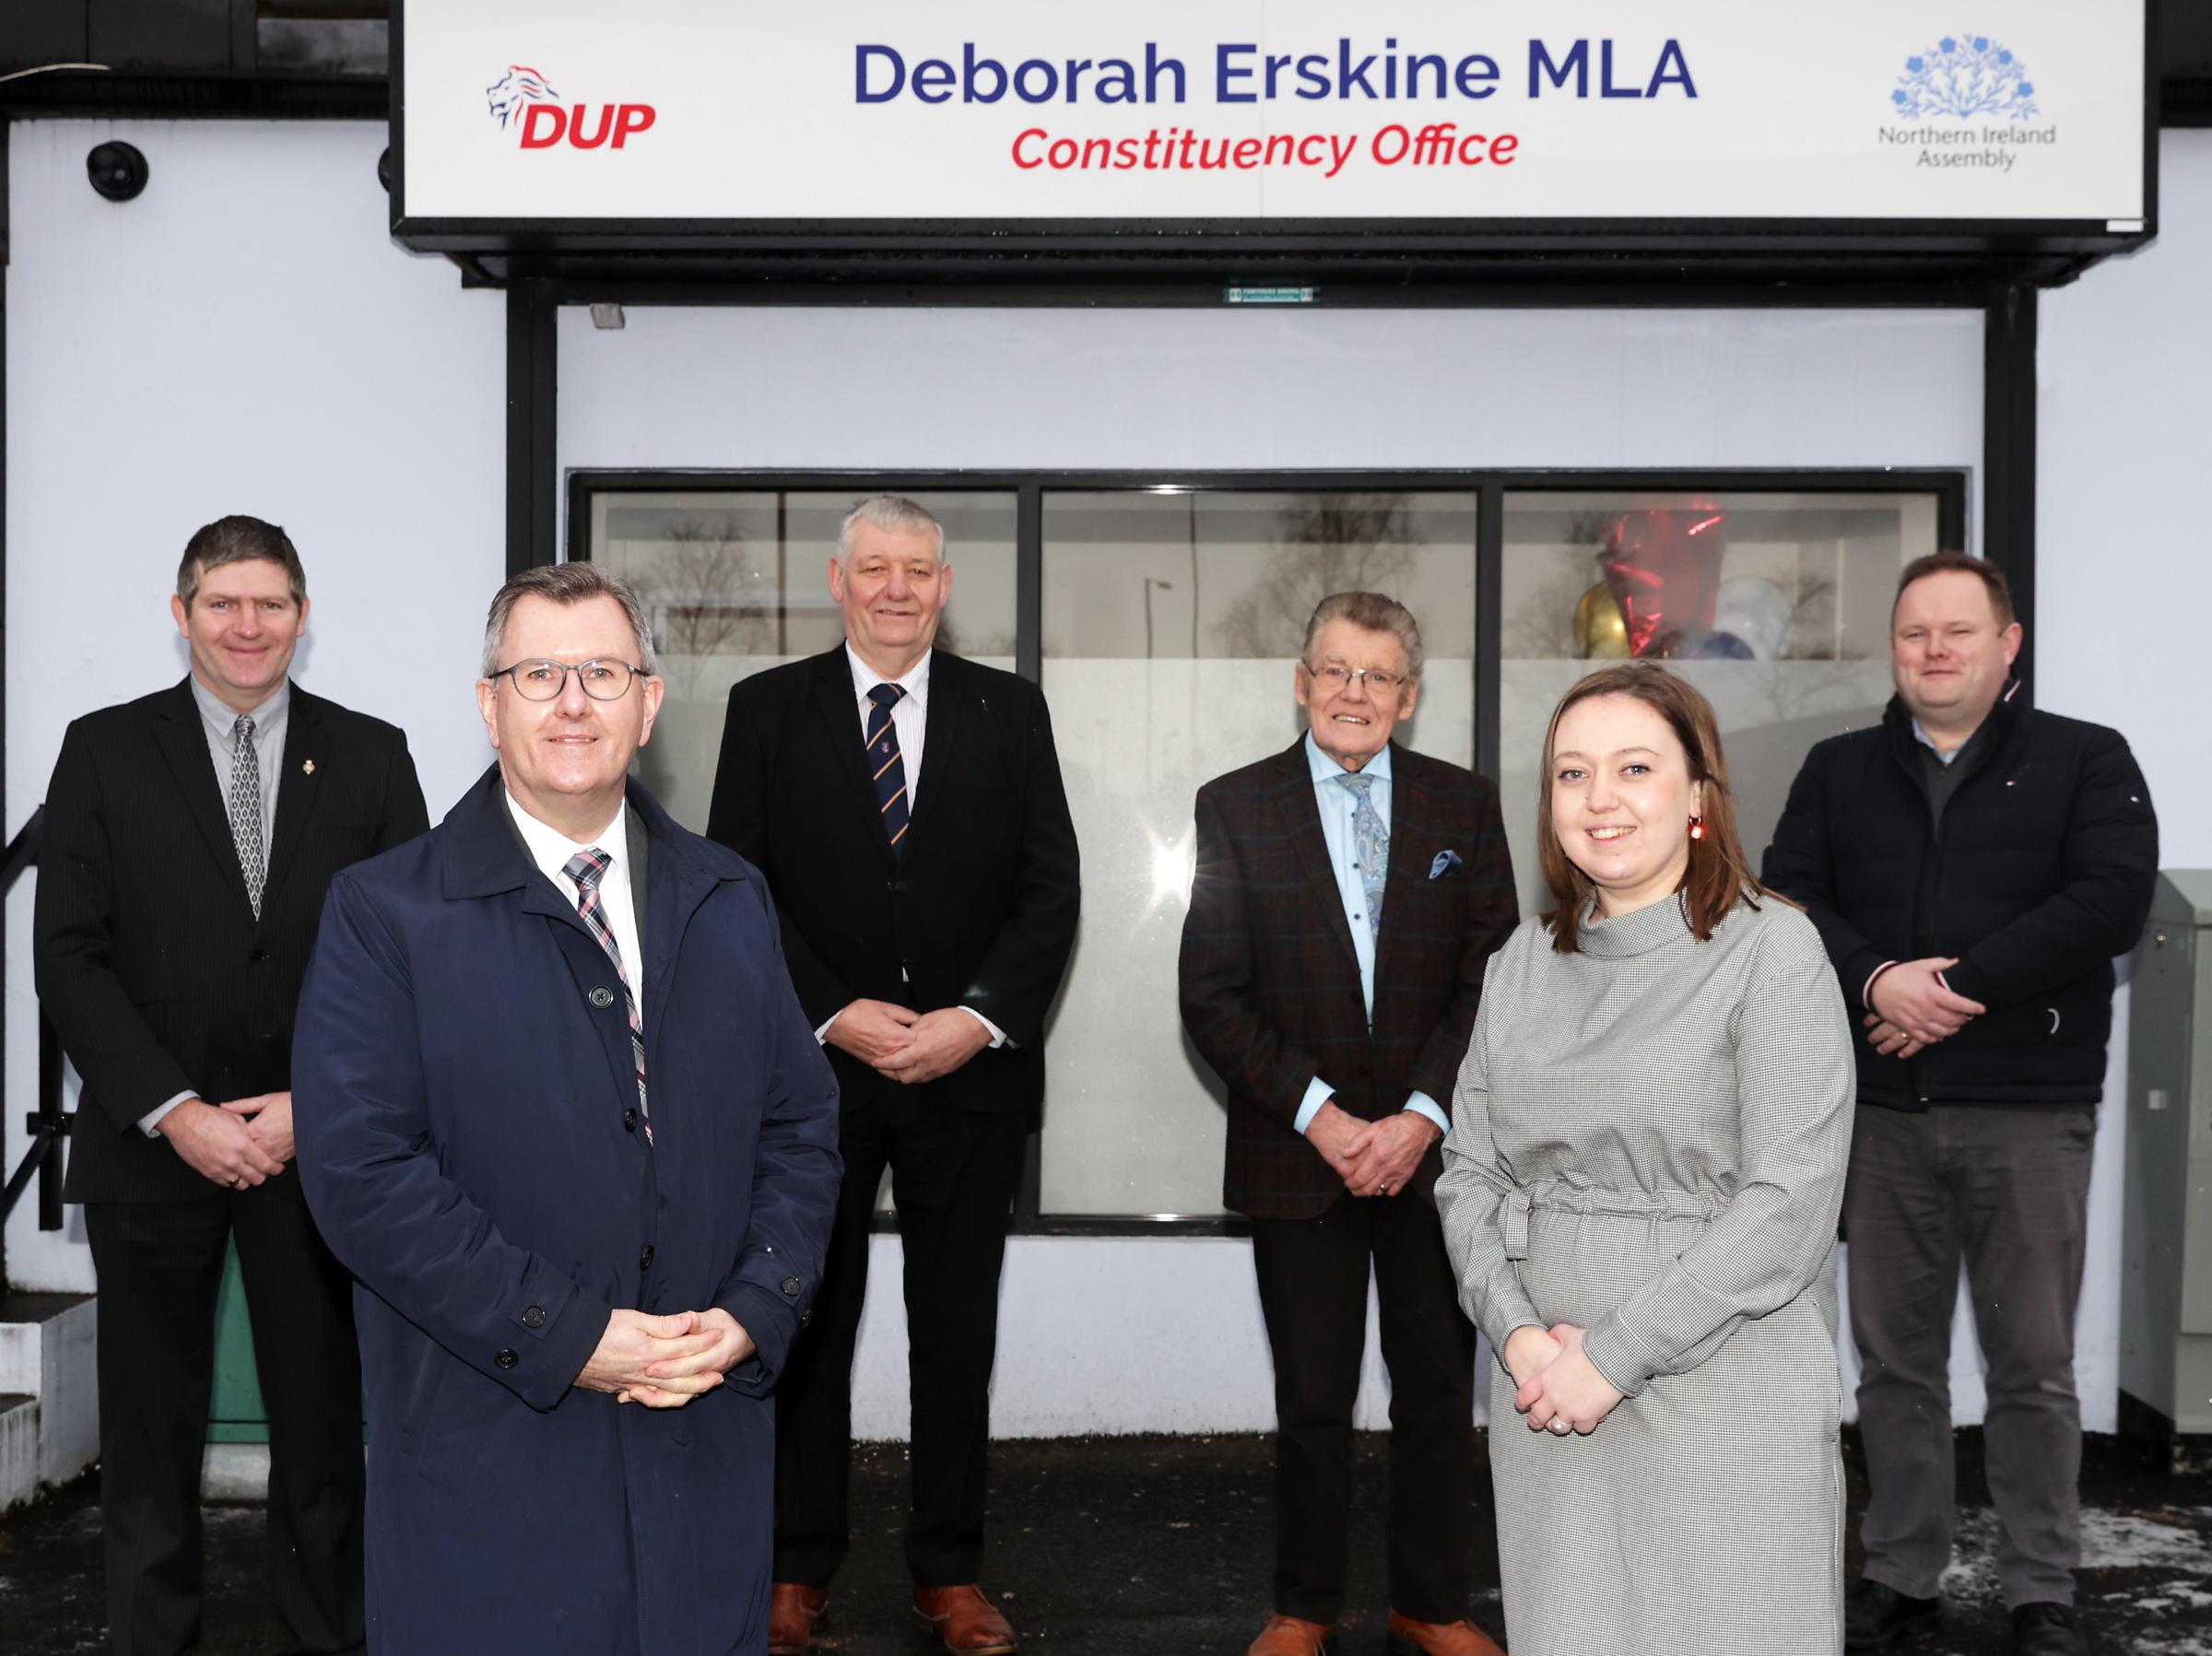 Pictured at the opening of the new DUP office in Enniskillen are front from left, Sir Jeffery Donaldson, MP and Deborah Erskine, MLA. Back from left, Paul Stevenson, Erne North; Paul Robinson, Erne East; Bert Johnston, Former Councillor and Keith